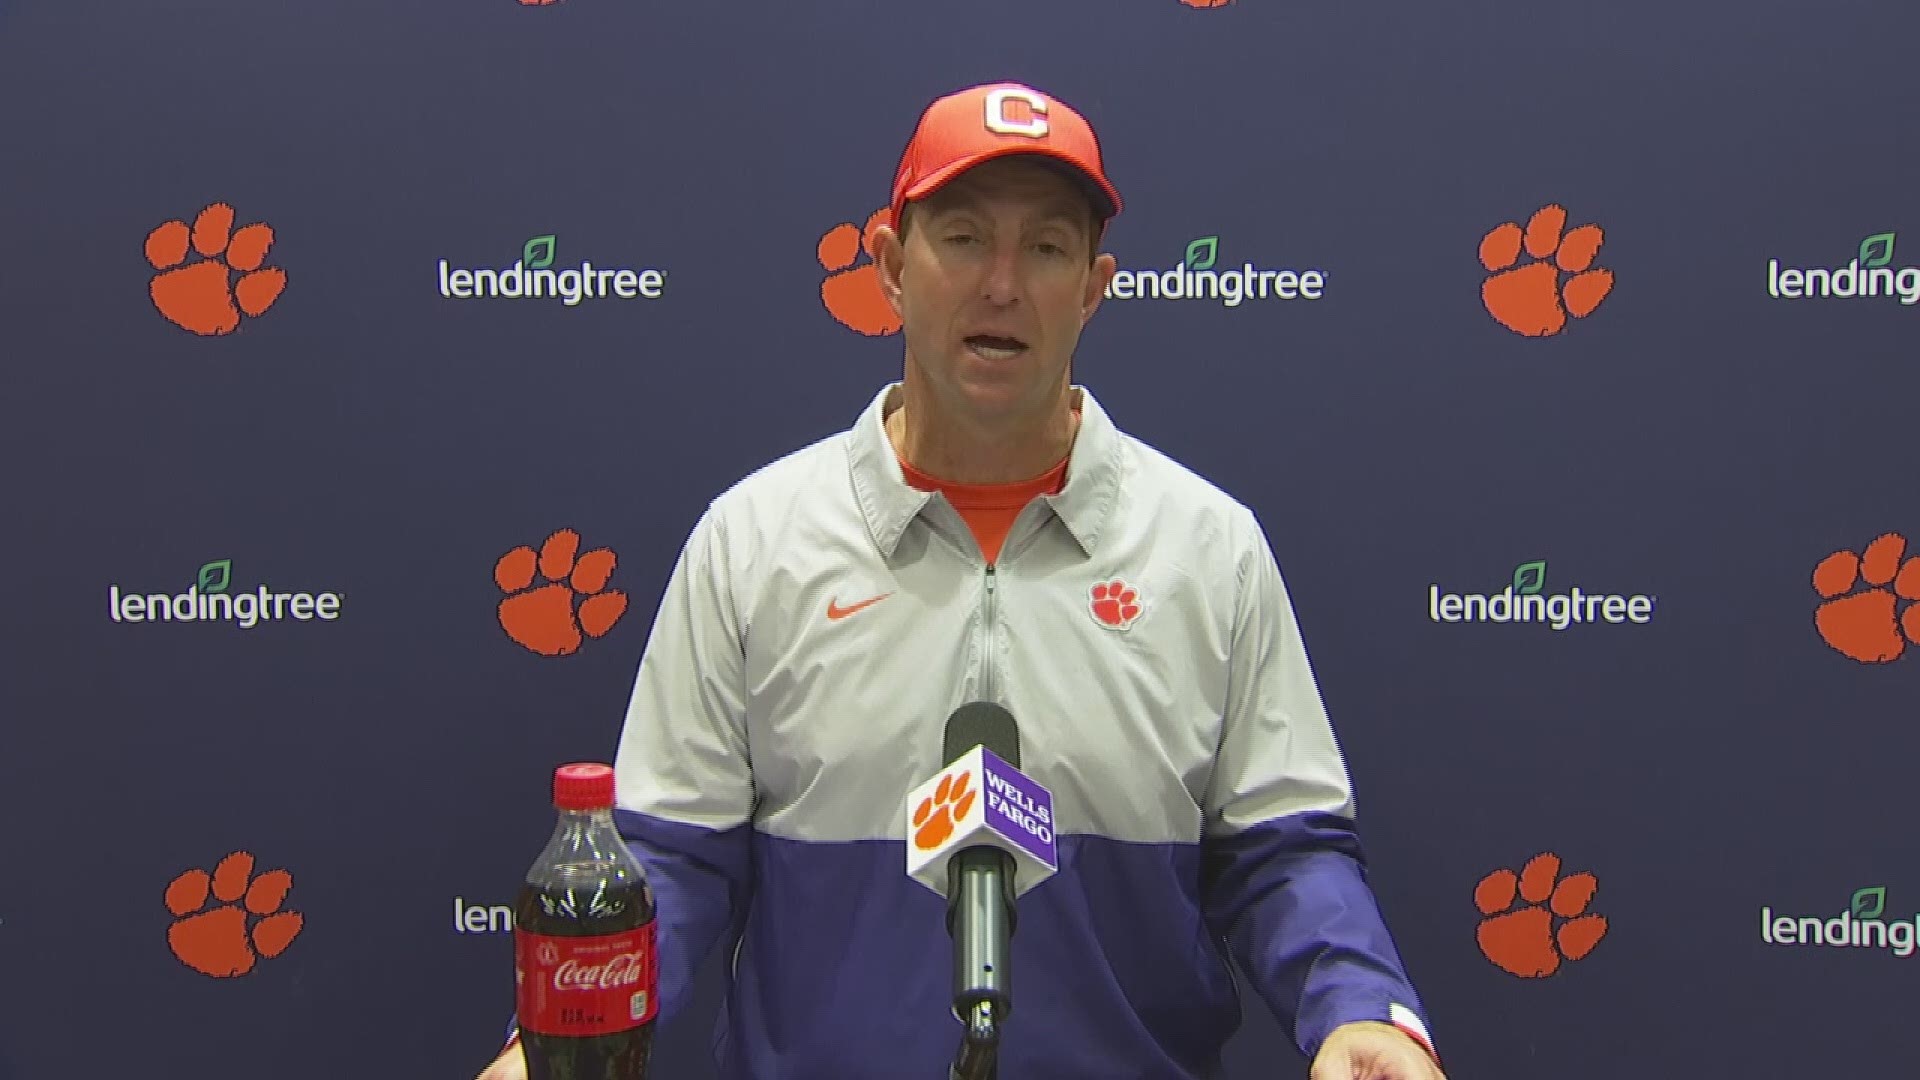 Clemson head football coach Dabo Swinney on finally getting to play after a long layoff & how Travis Etienne is comparable to former Atlanta Braves ace Greg Maddux.